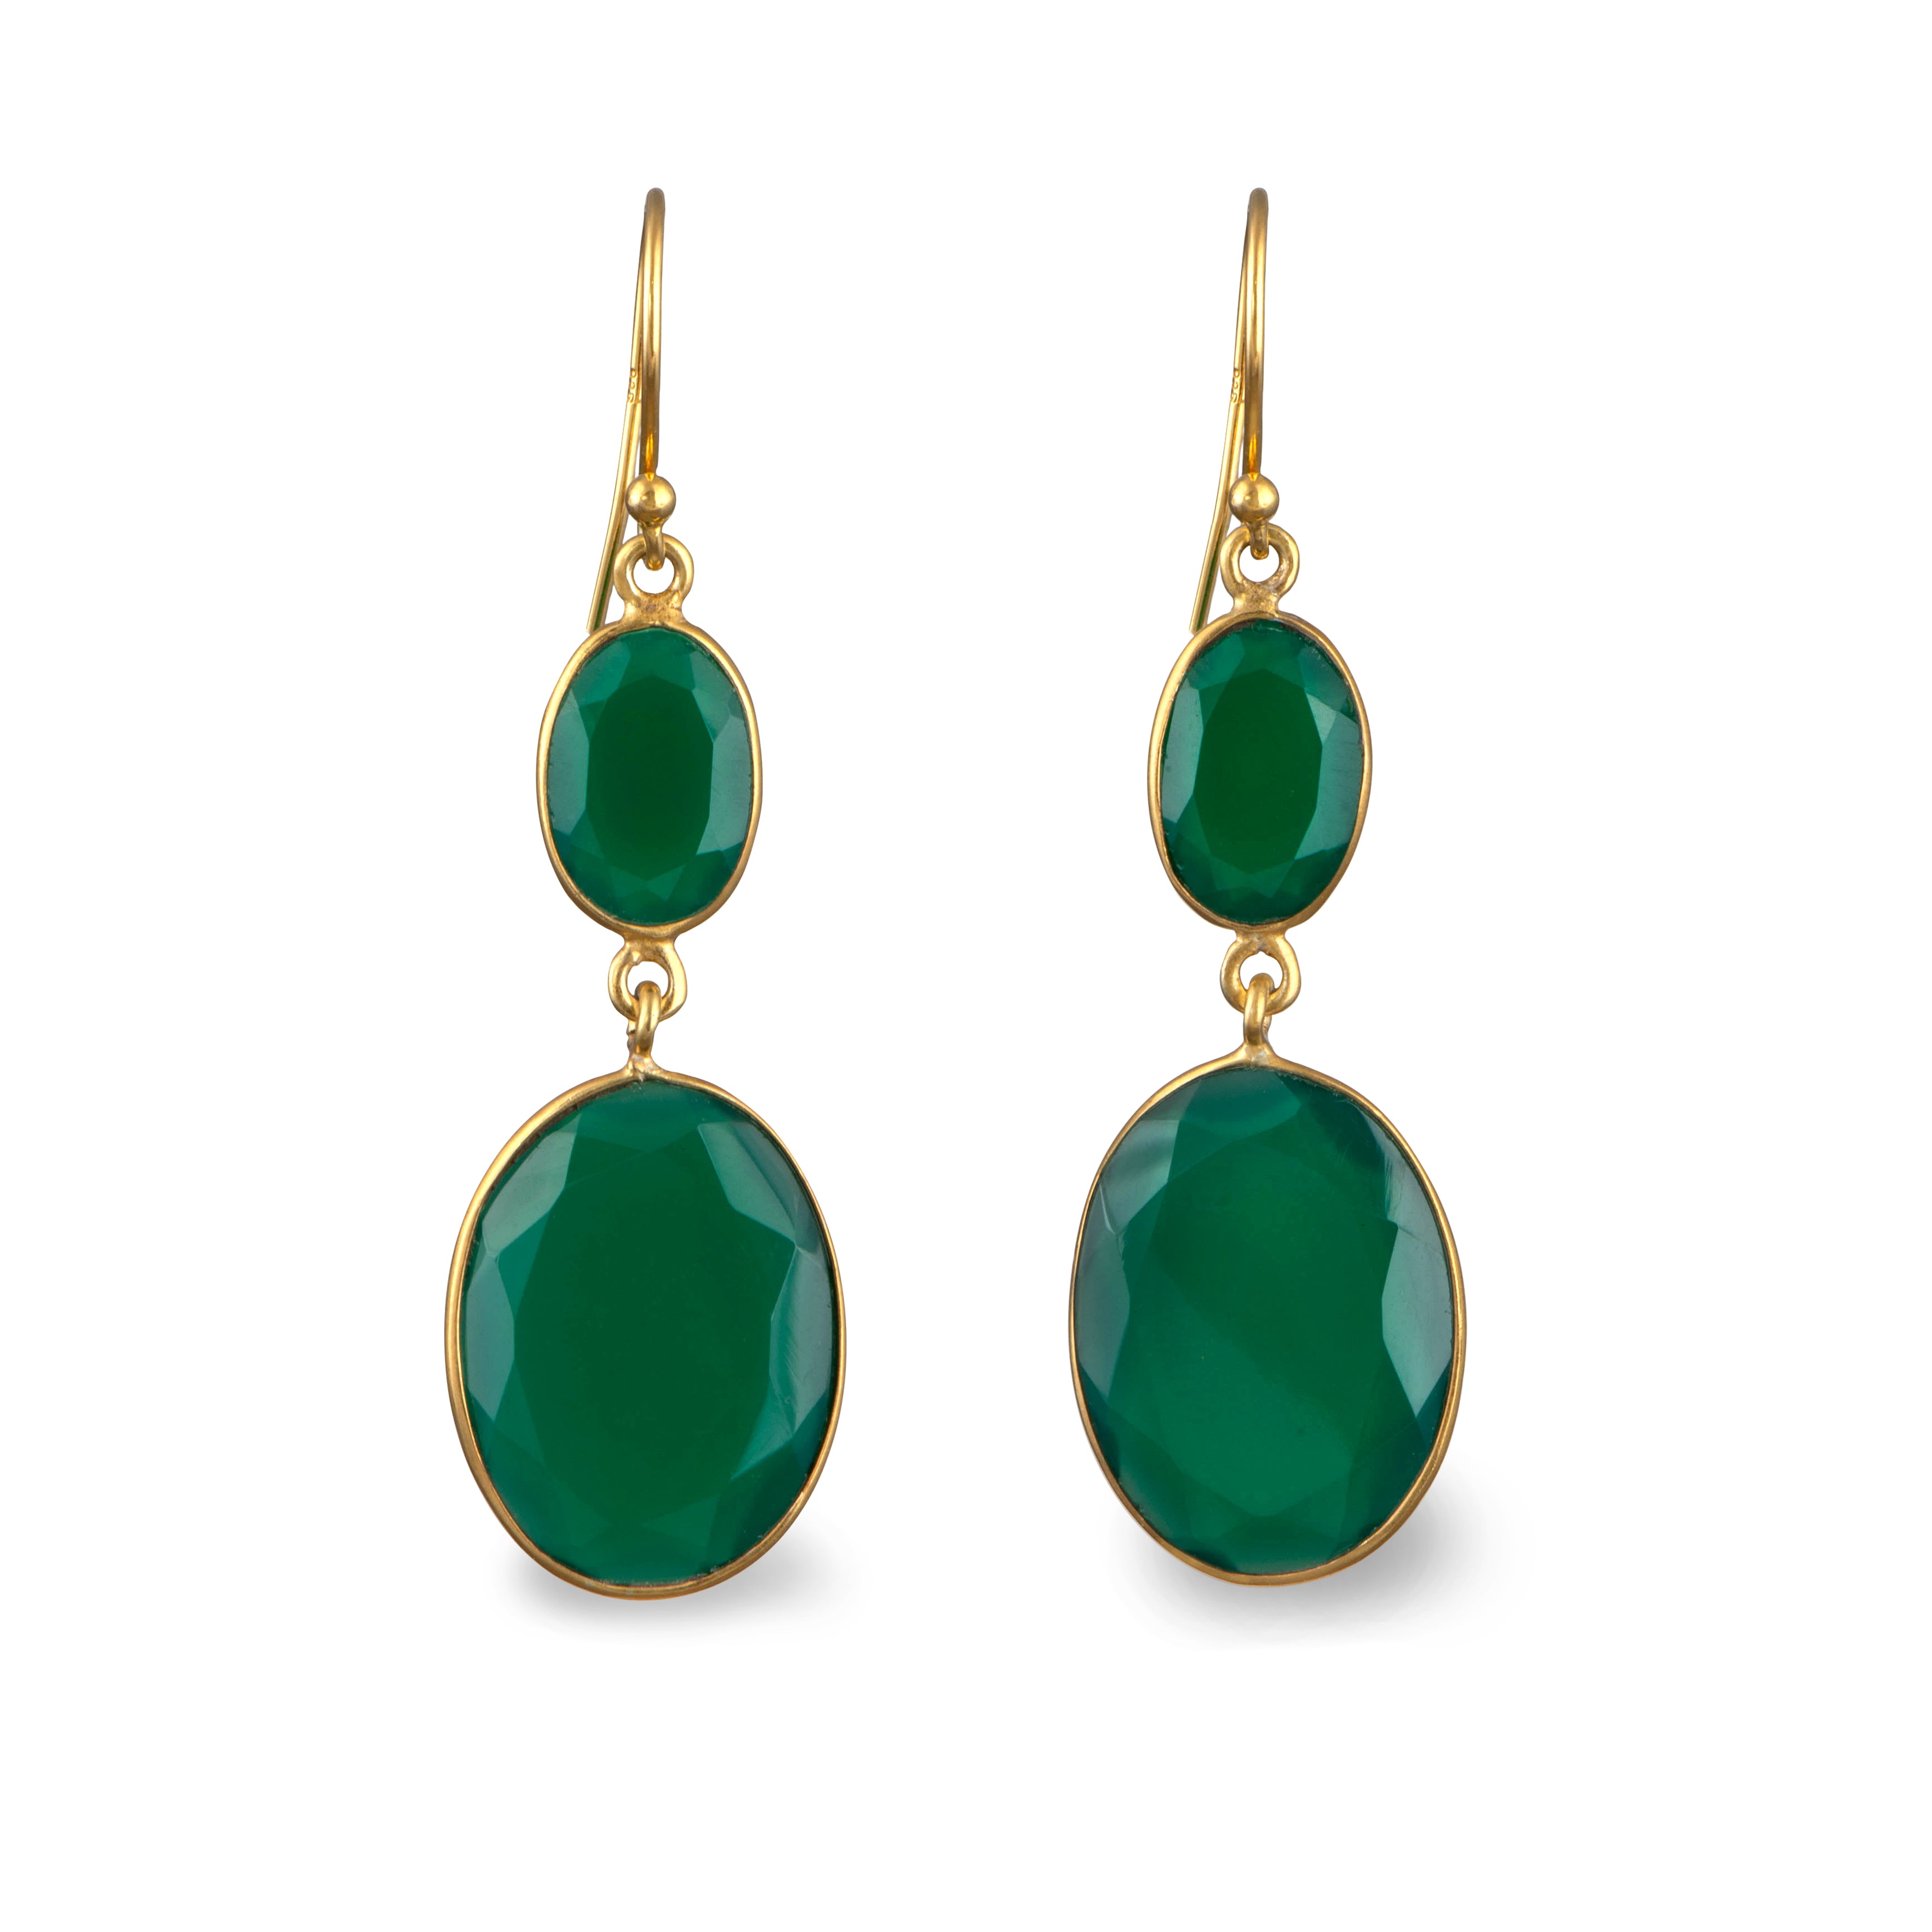 Gold Plated Sterling Silver Natural Gemstone Long Earrings - Green Onyx